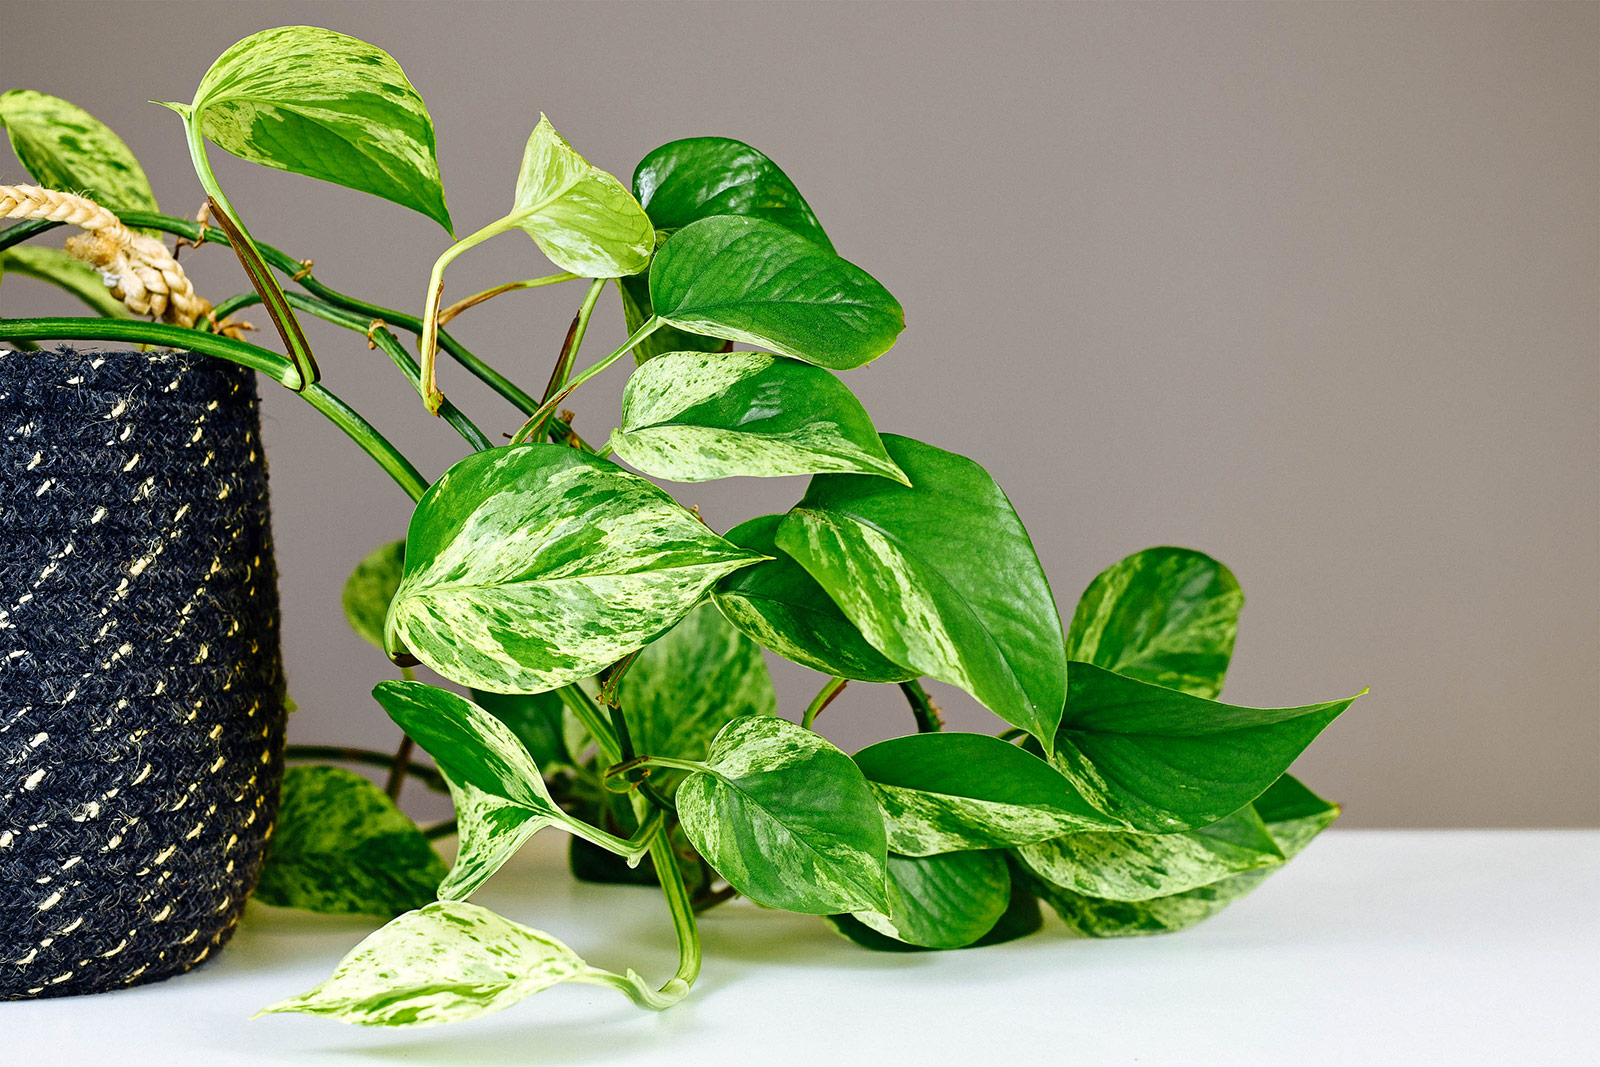 Marble Queen pothos (Epipremnum aureum) vines trailing down to a table from a black fabric pot